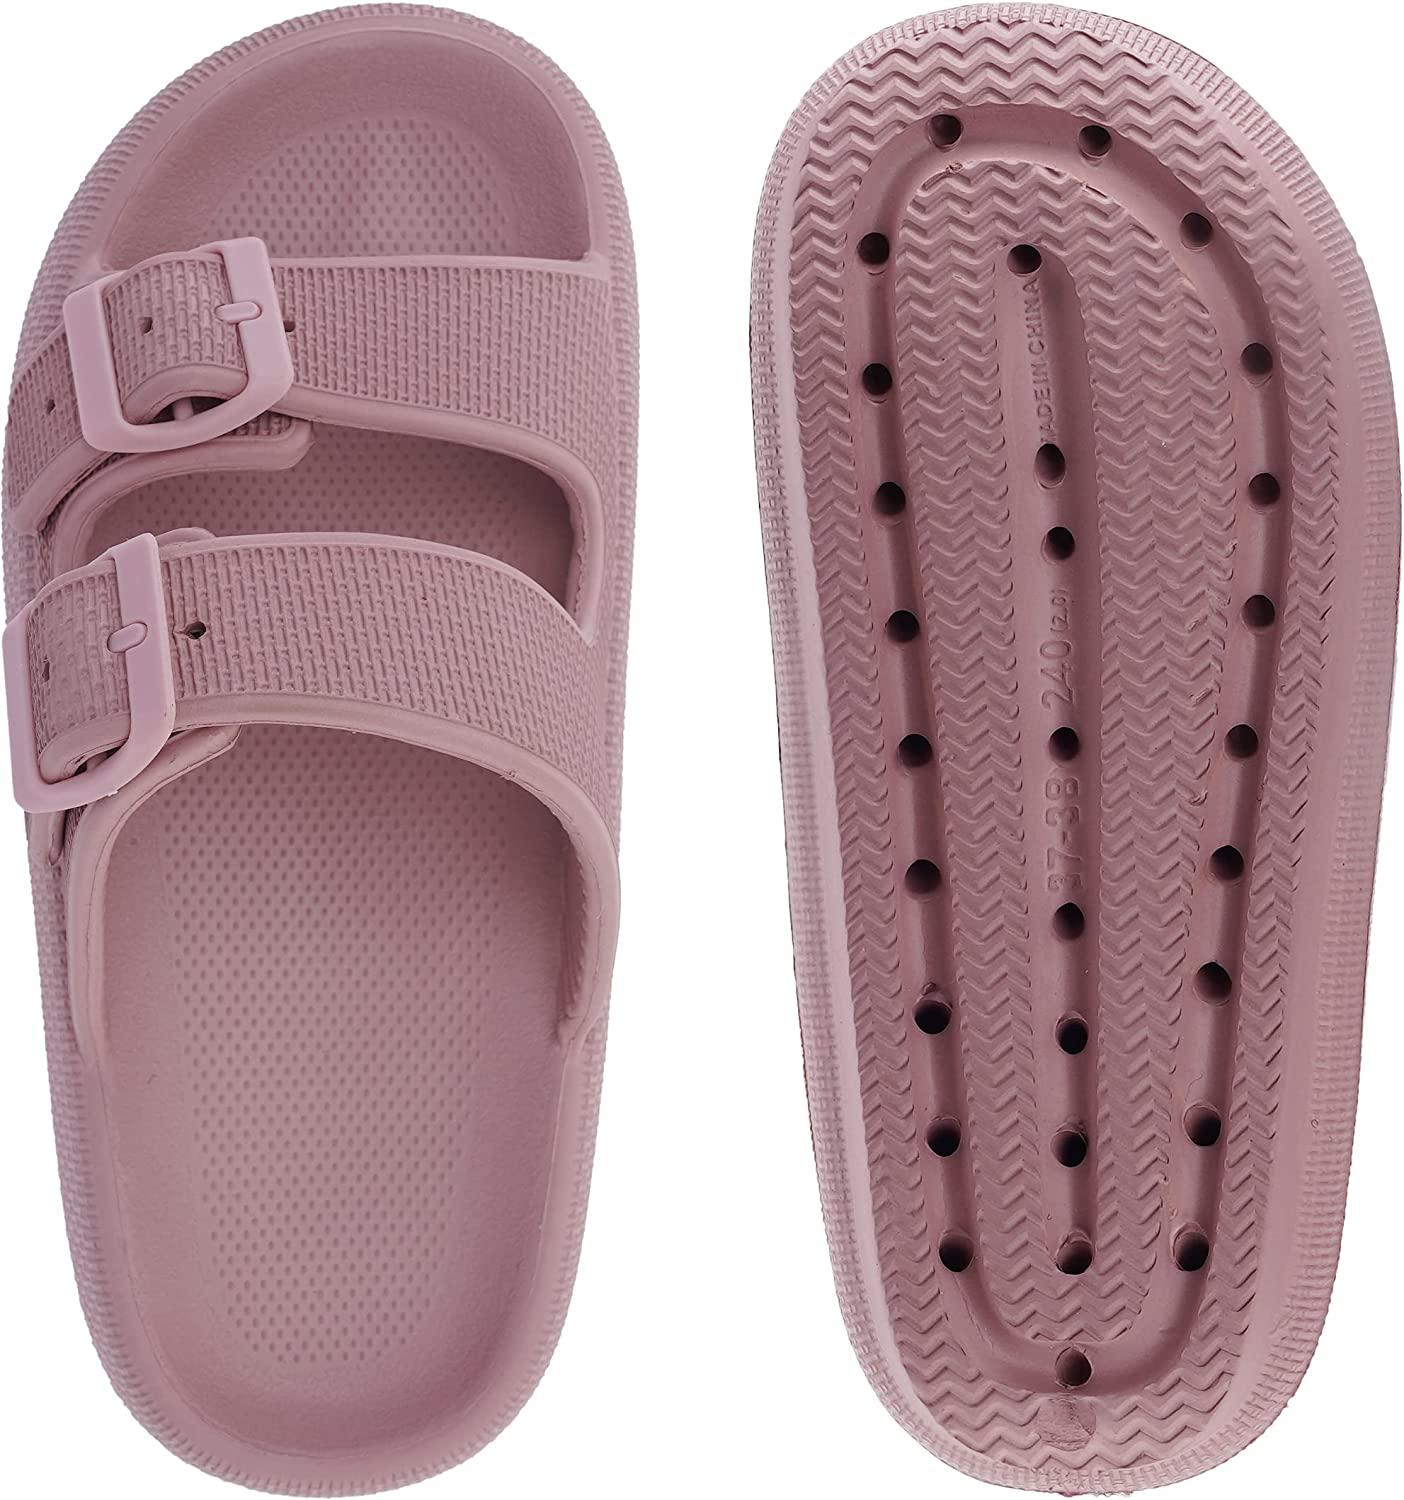 Pillow Slides Cloud Slides for Women and Men | Double Buckle Adjustable Sandals for Women Pillow Slippers Thick Sole Cushionable Sandals Eva